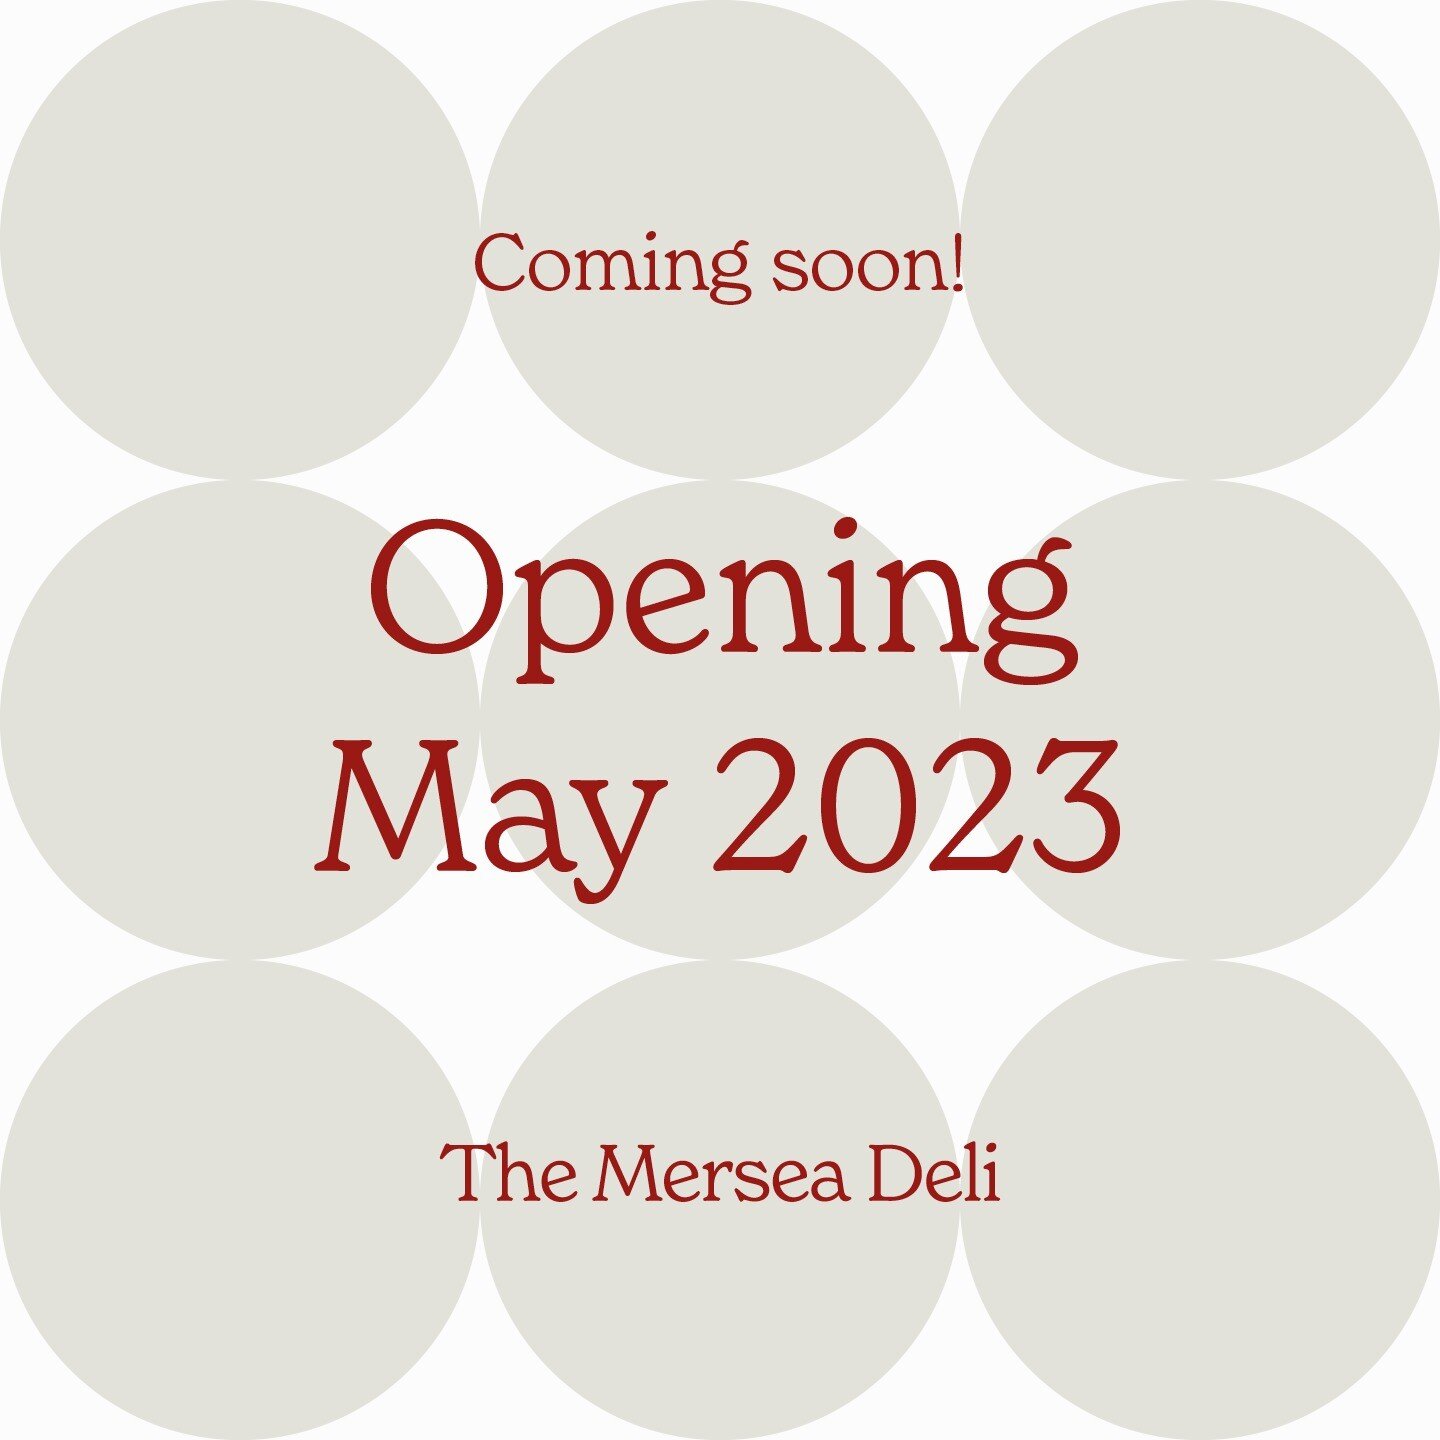 Coming soon! Your new delicatessen, 42 High Street West Mersea, opening May 2023, brought to you by the people behind @datailoredcatering.
&mdash;
Indoor &amp; outdoor seating, serving coffee, pastries, freshly baked goods, sandwiches, salads, cheese